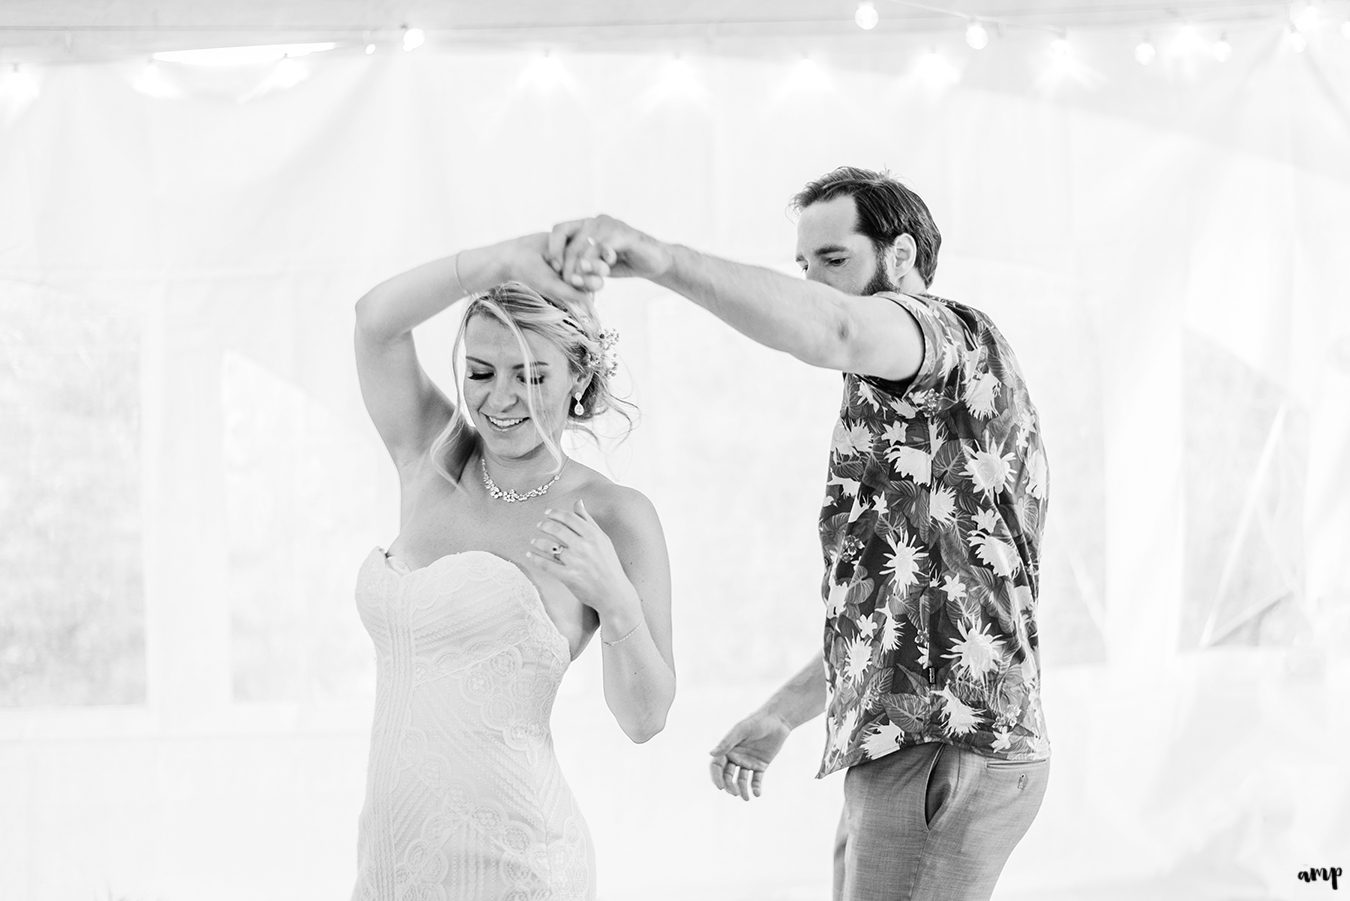 Dan and Courtney share their first dance at the Mountain Wedding Garden